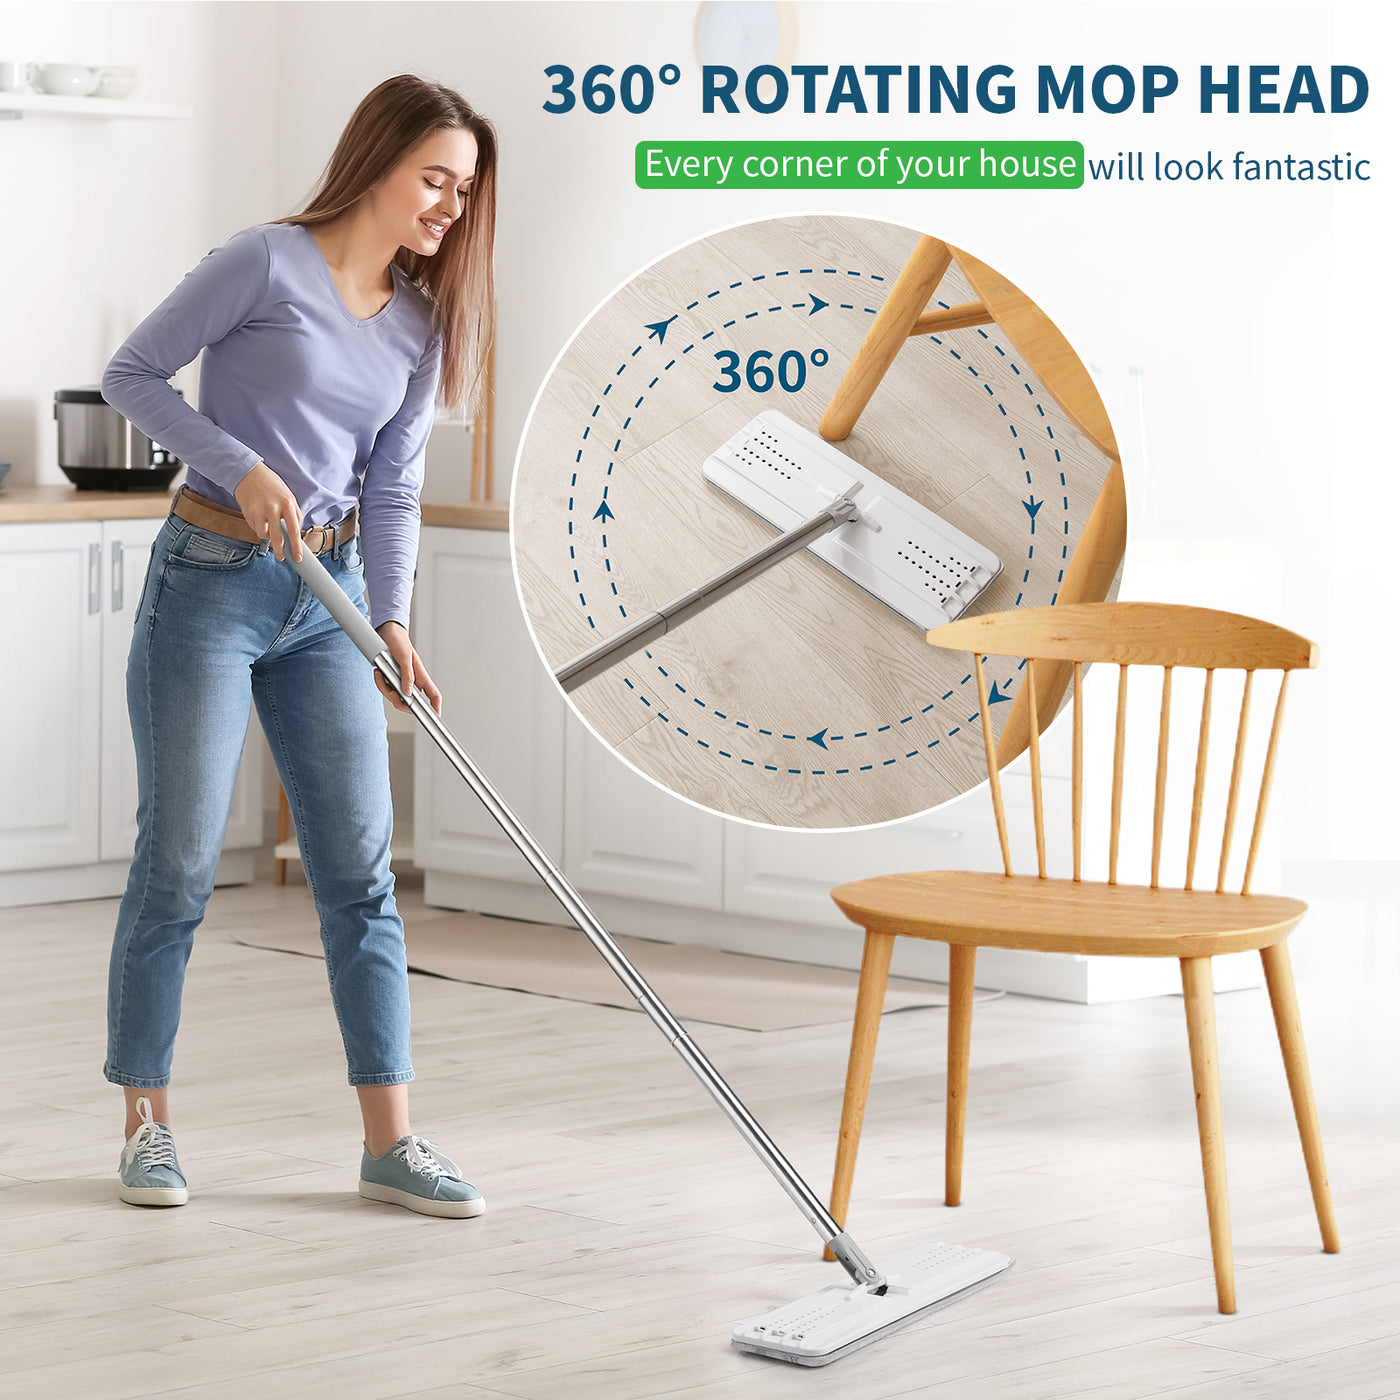 Flat Mop With 2/4 Mop Pads, Long Handle Hands-free Wash Flat Mop